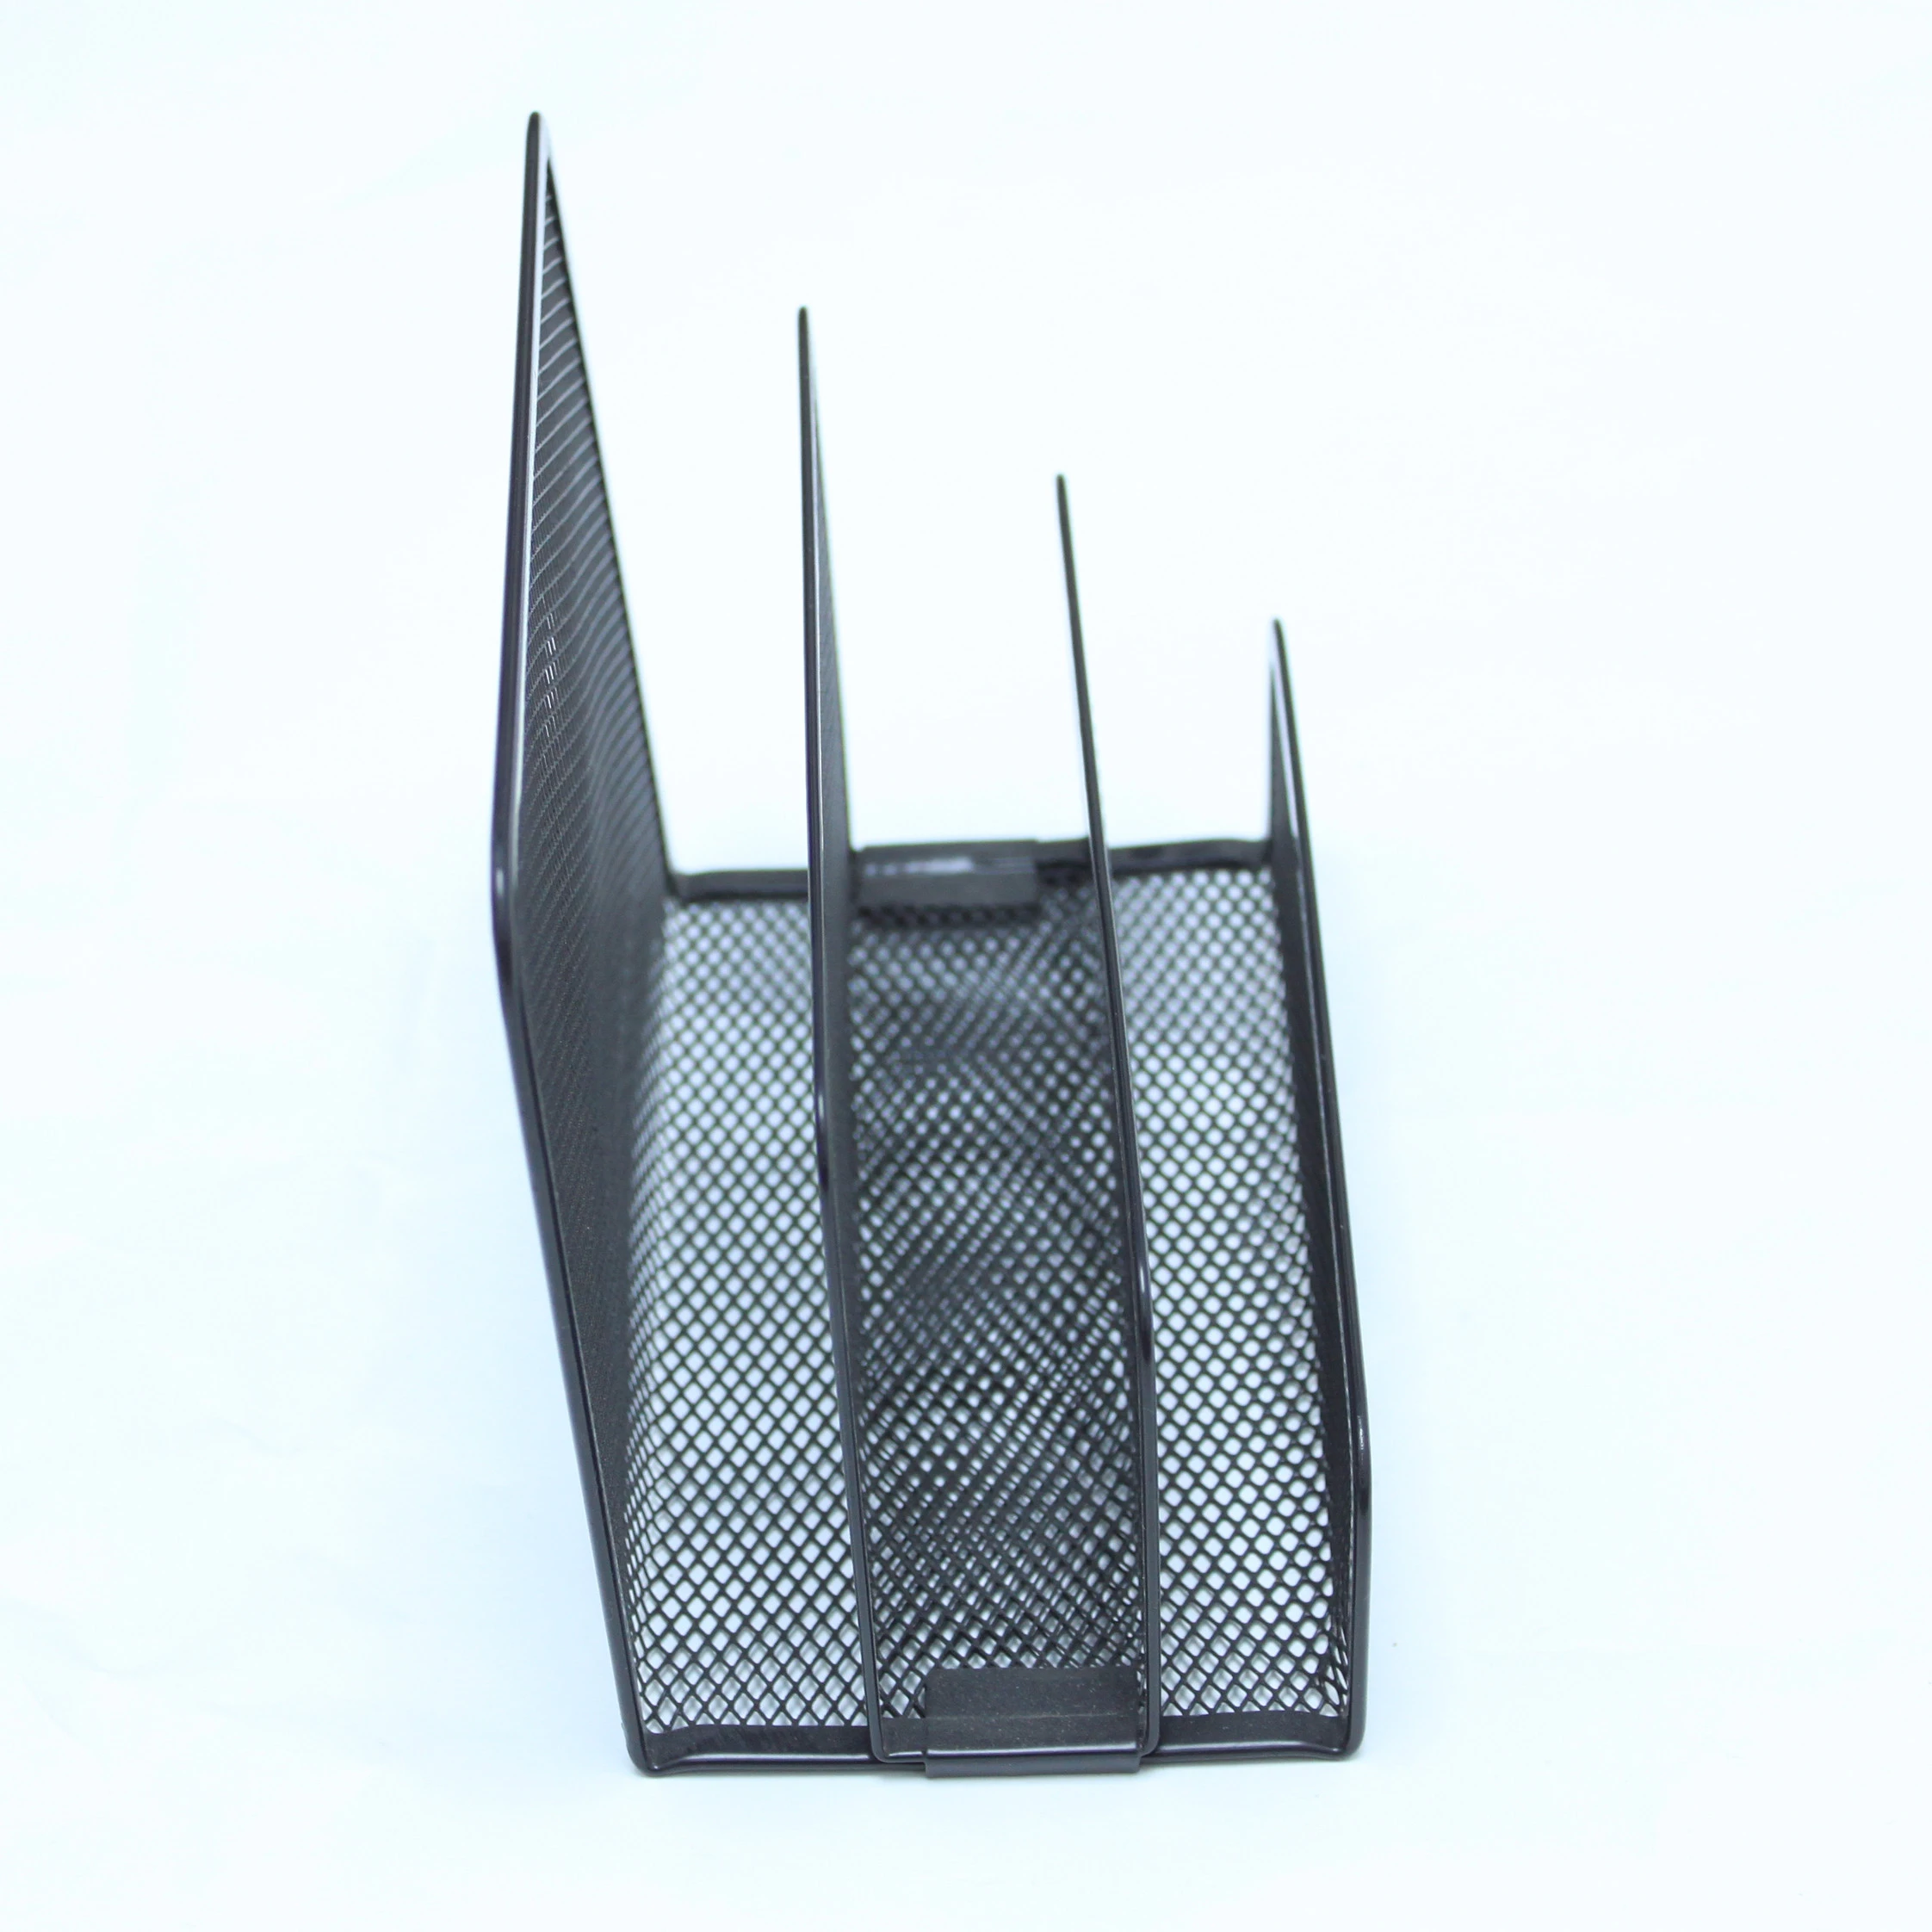 High quality office stationery metal mesh wire desk organizer ,letter sorter and mesh pen holder